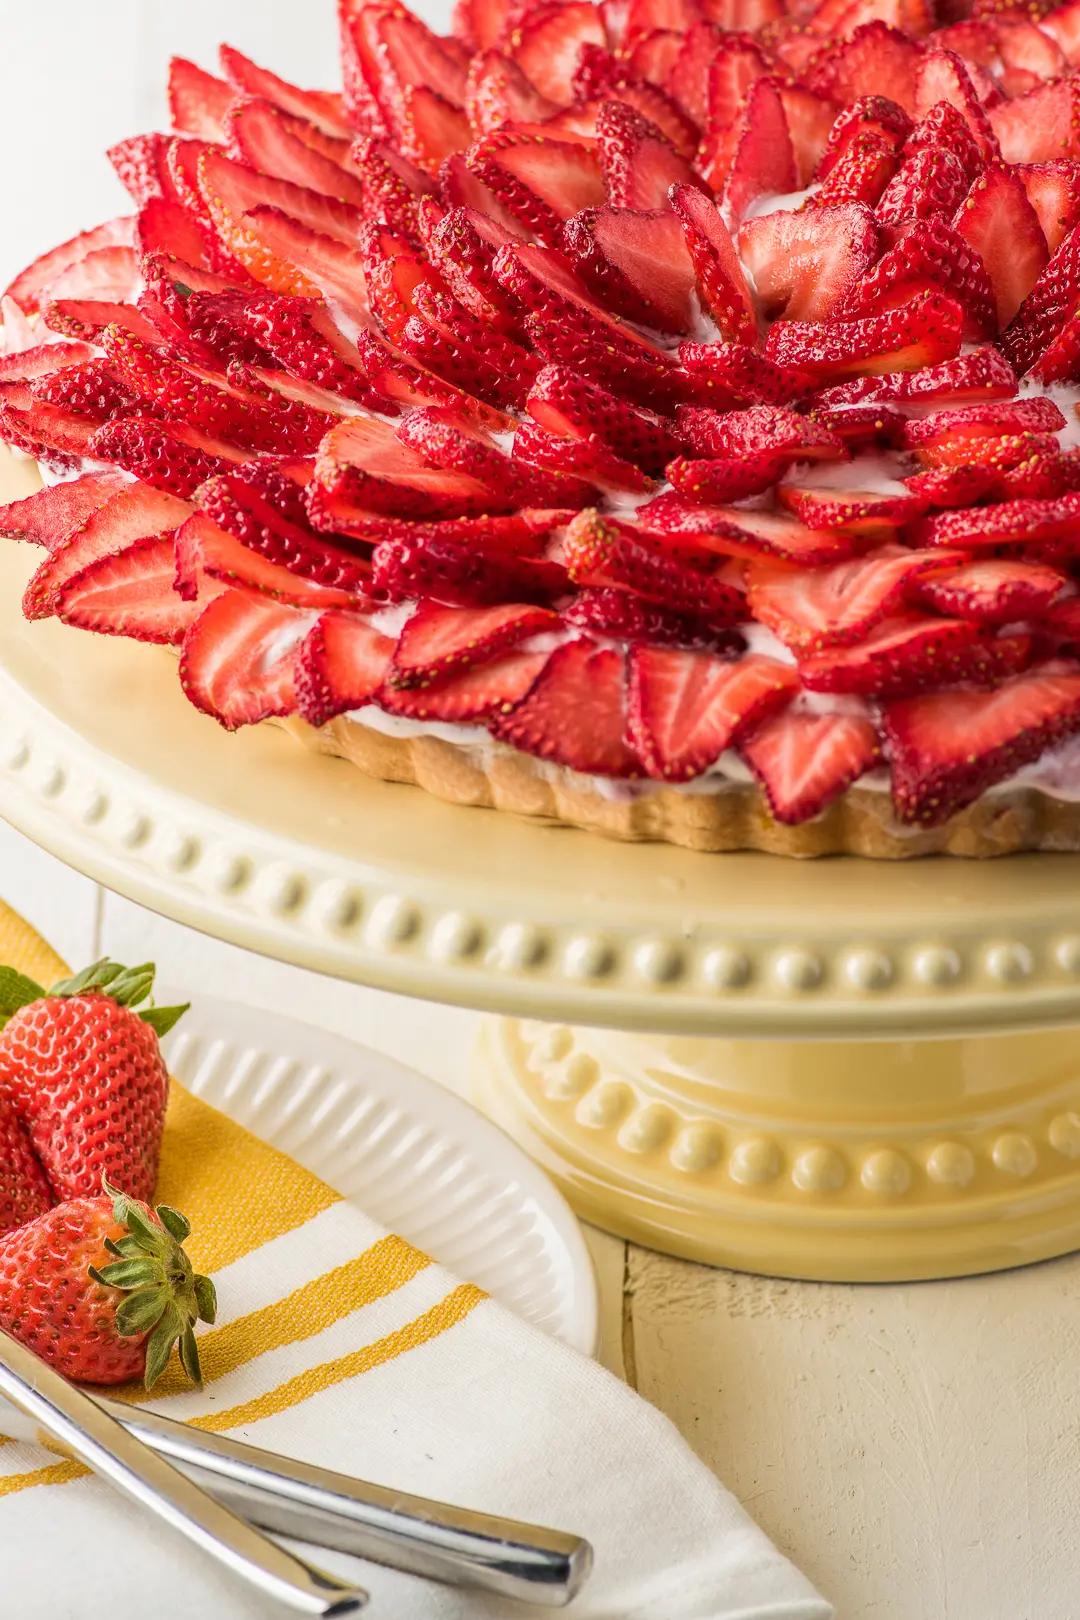 A strawberry cream pie topped with sliced strawberries on a yellow cake stand